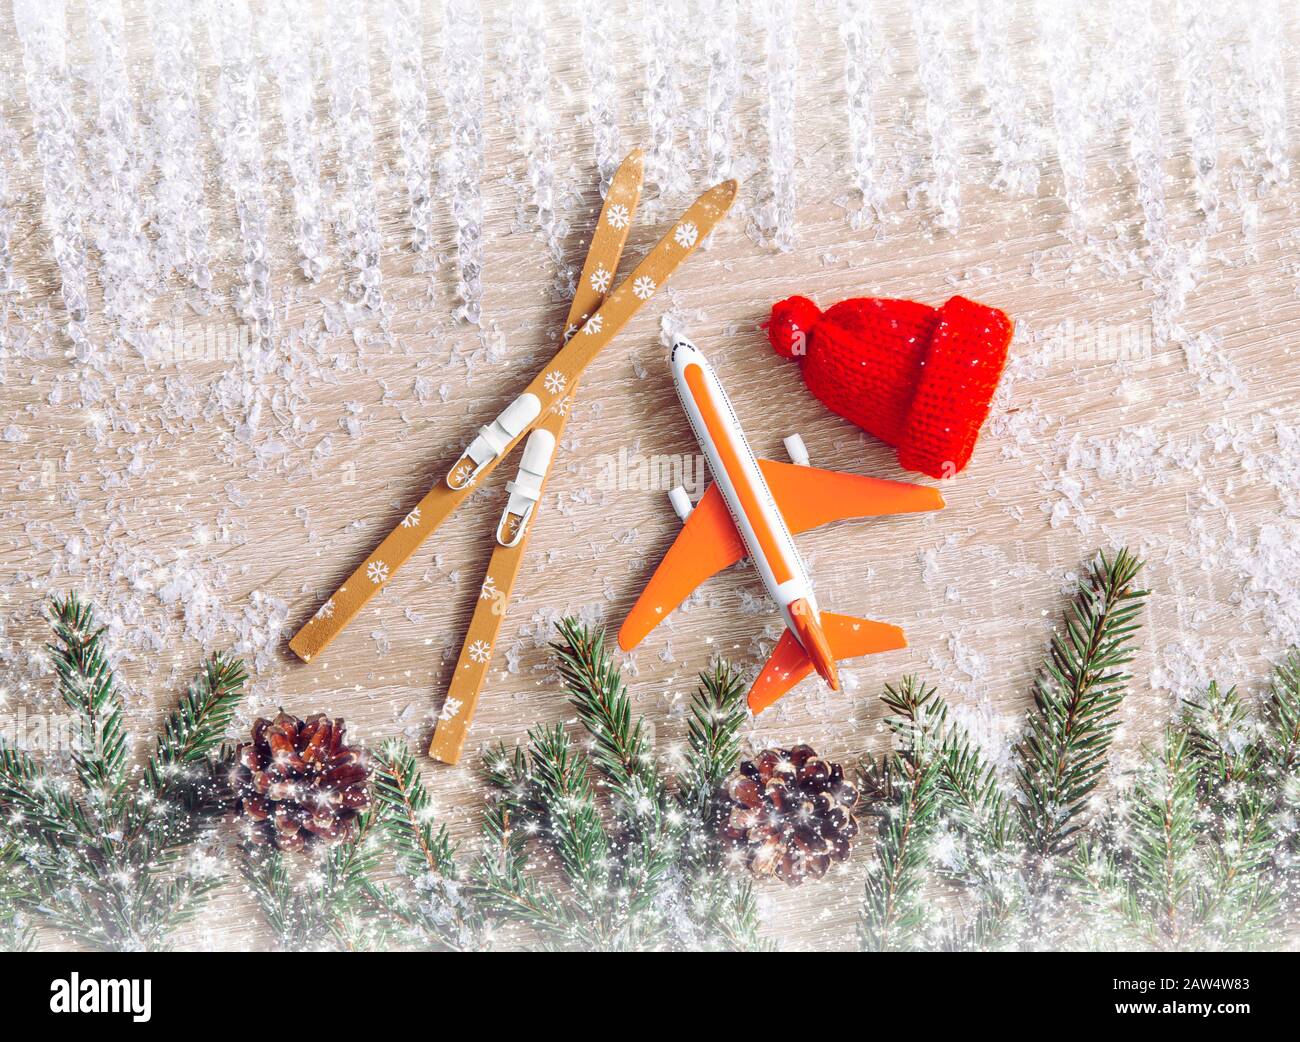 Go on winter ski trip concept. Top view of airplane, skis, beanie hats, spruce tree branches on natural comfortable wood background. Stock Photo